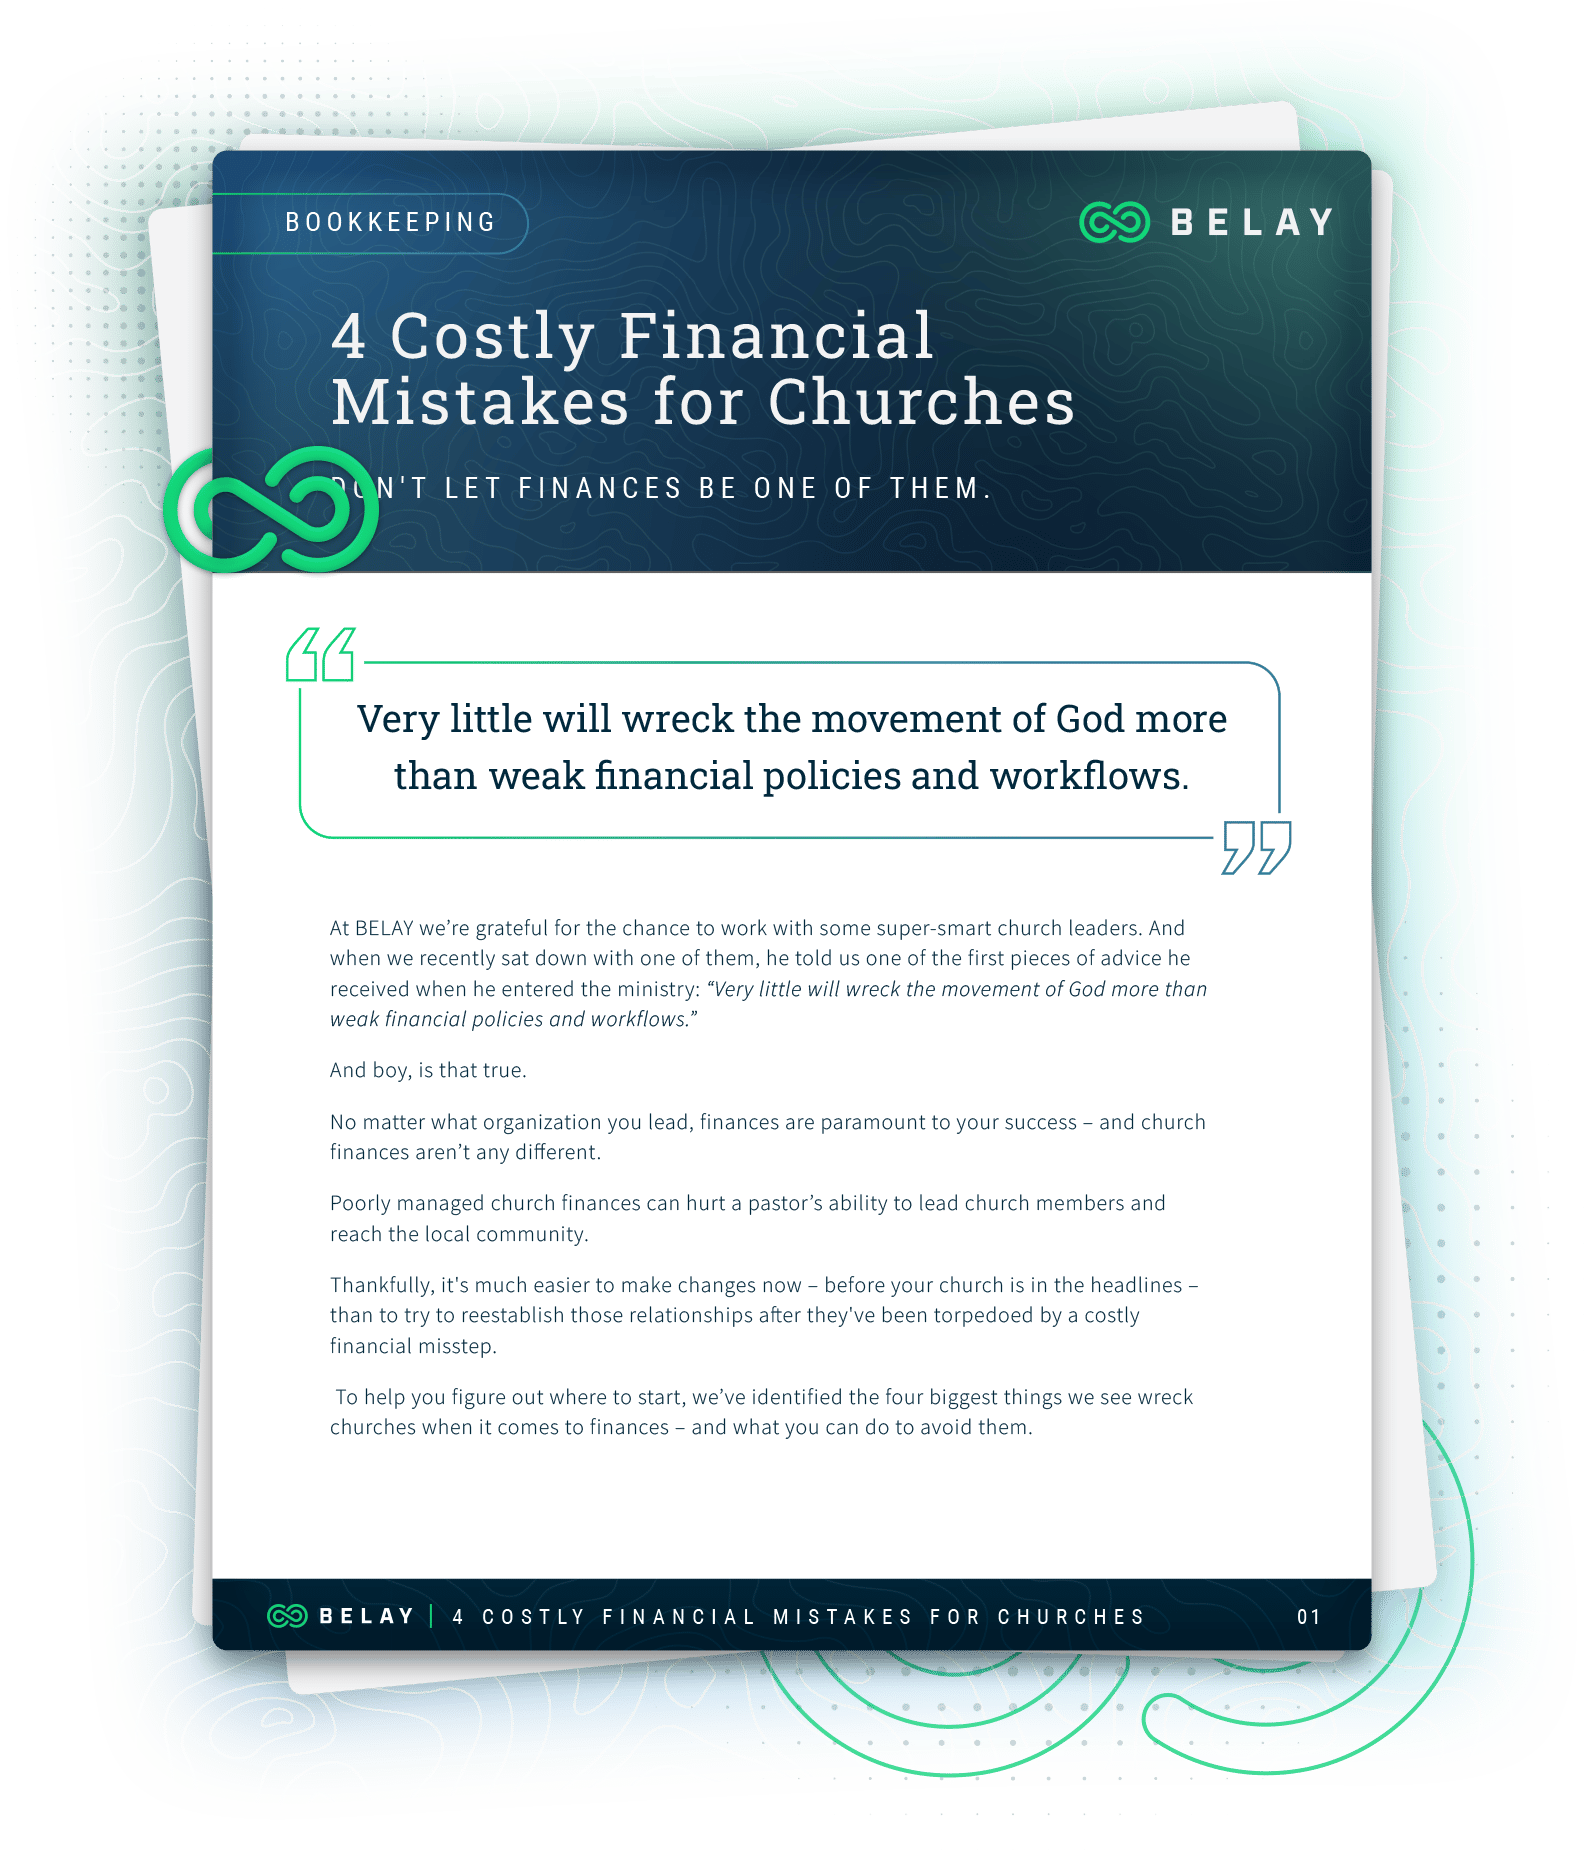 4 Costly Financial Mistakes for Churches